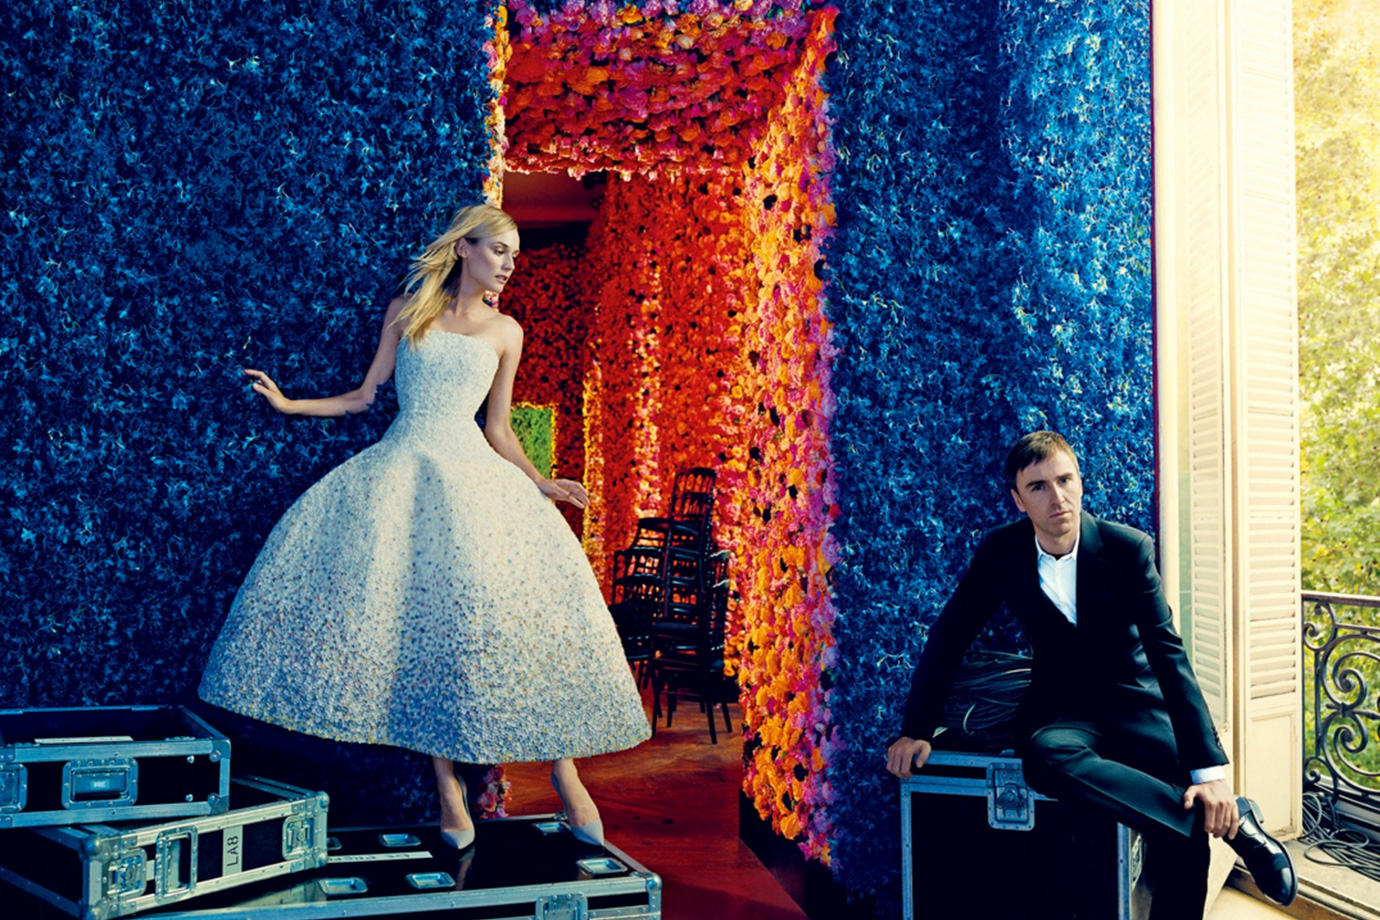 as-raf-simons-bids-adieu-to-dior-a-look-at-his-work-in-vogue-09.jpg